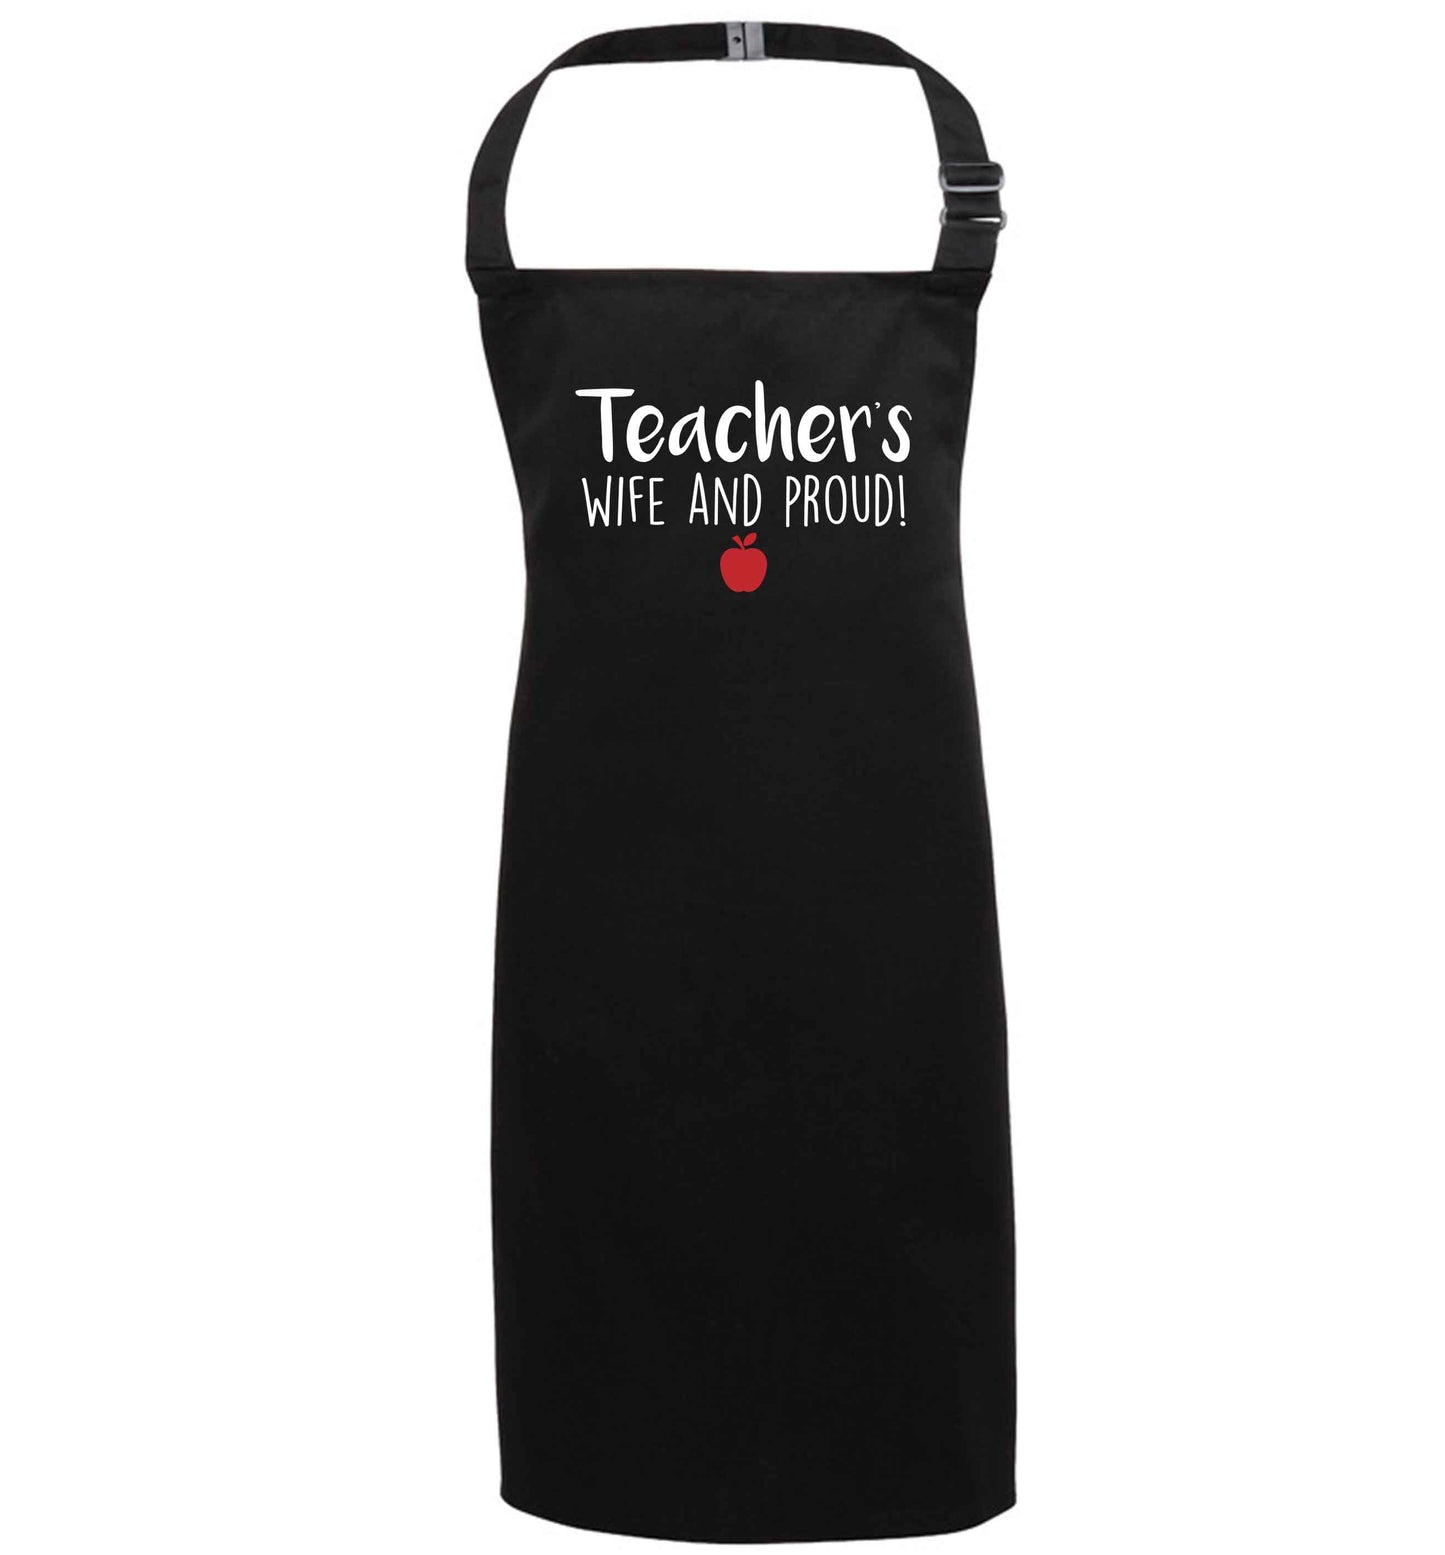 Teachers wife and proud black apron 7-10 years